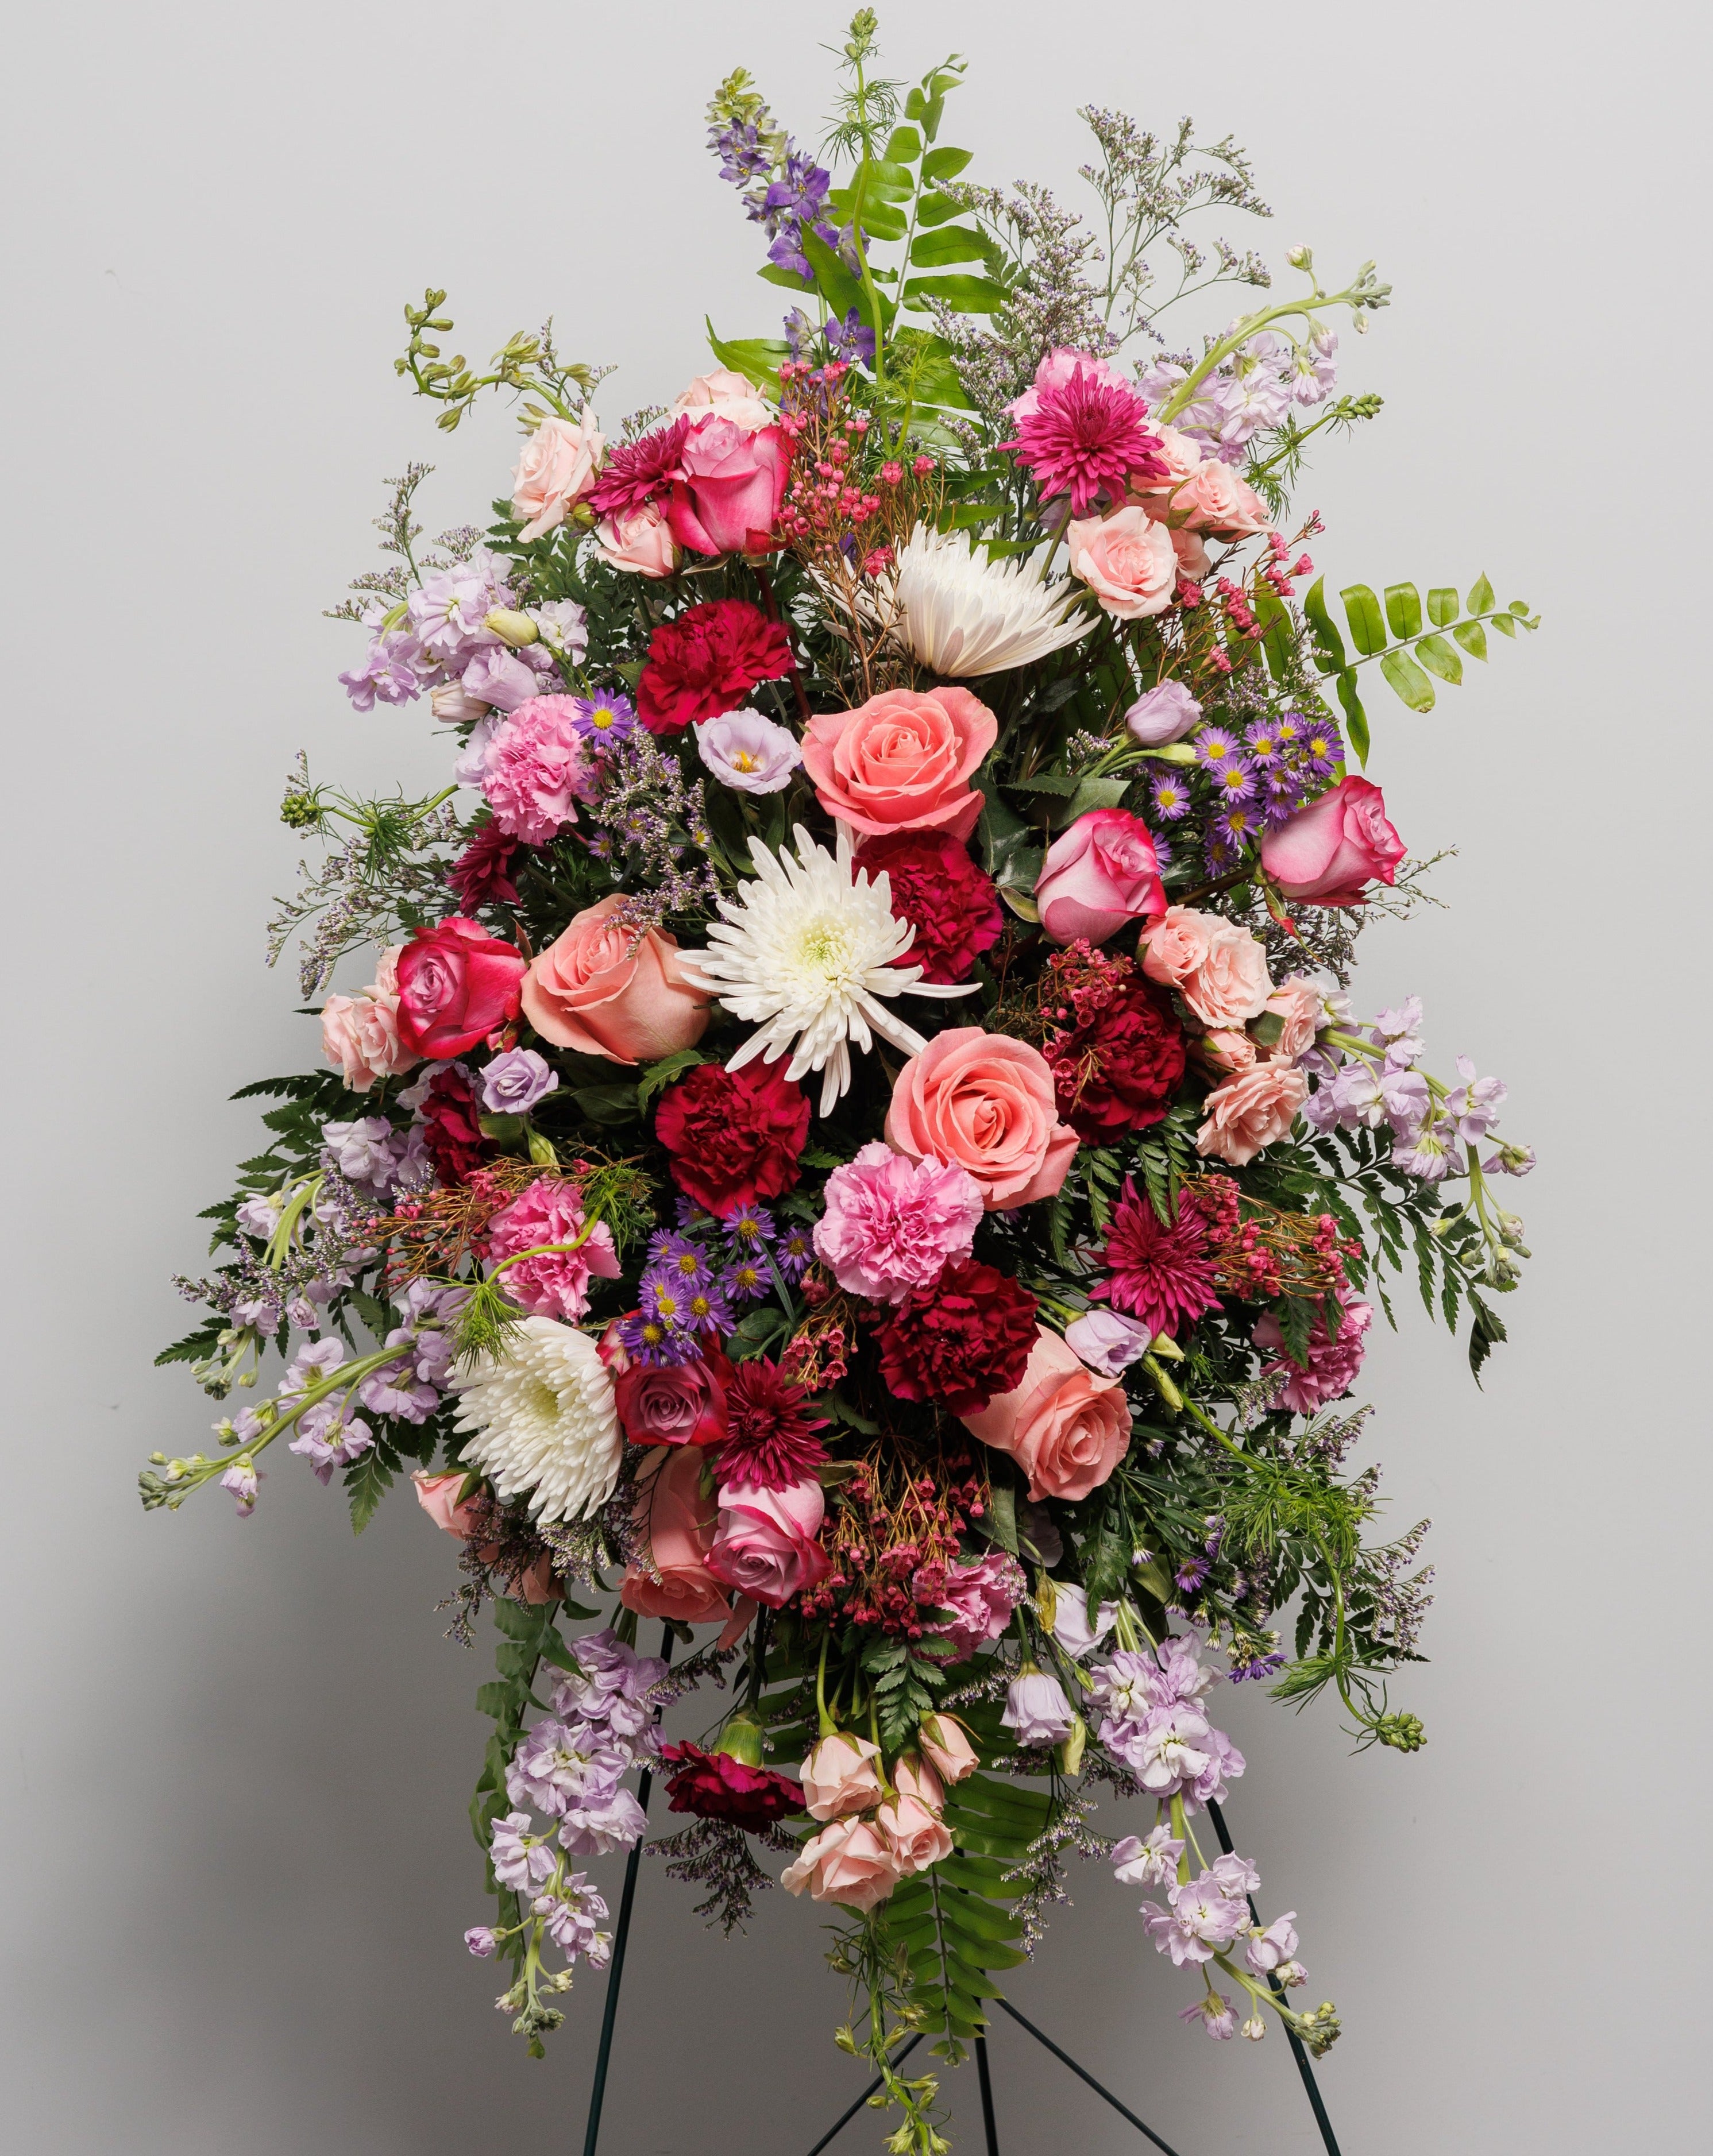 A standing spray primarily in shades of purple including roses, sock and carnations.